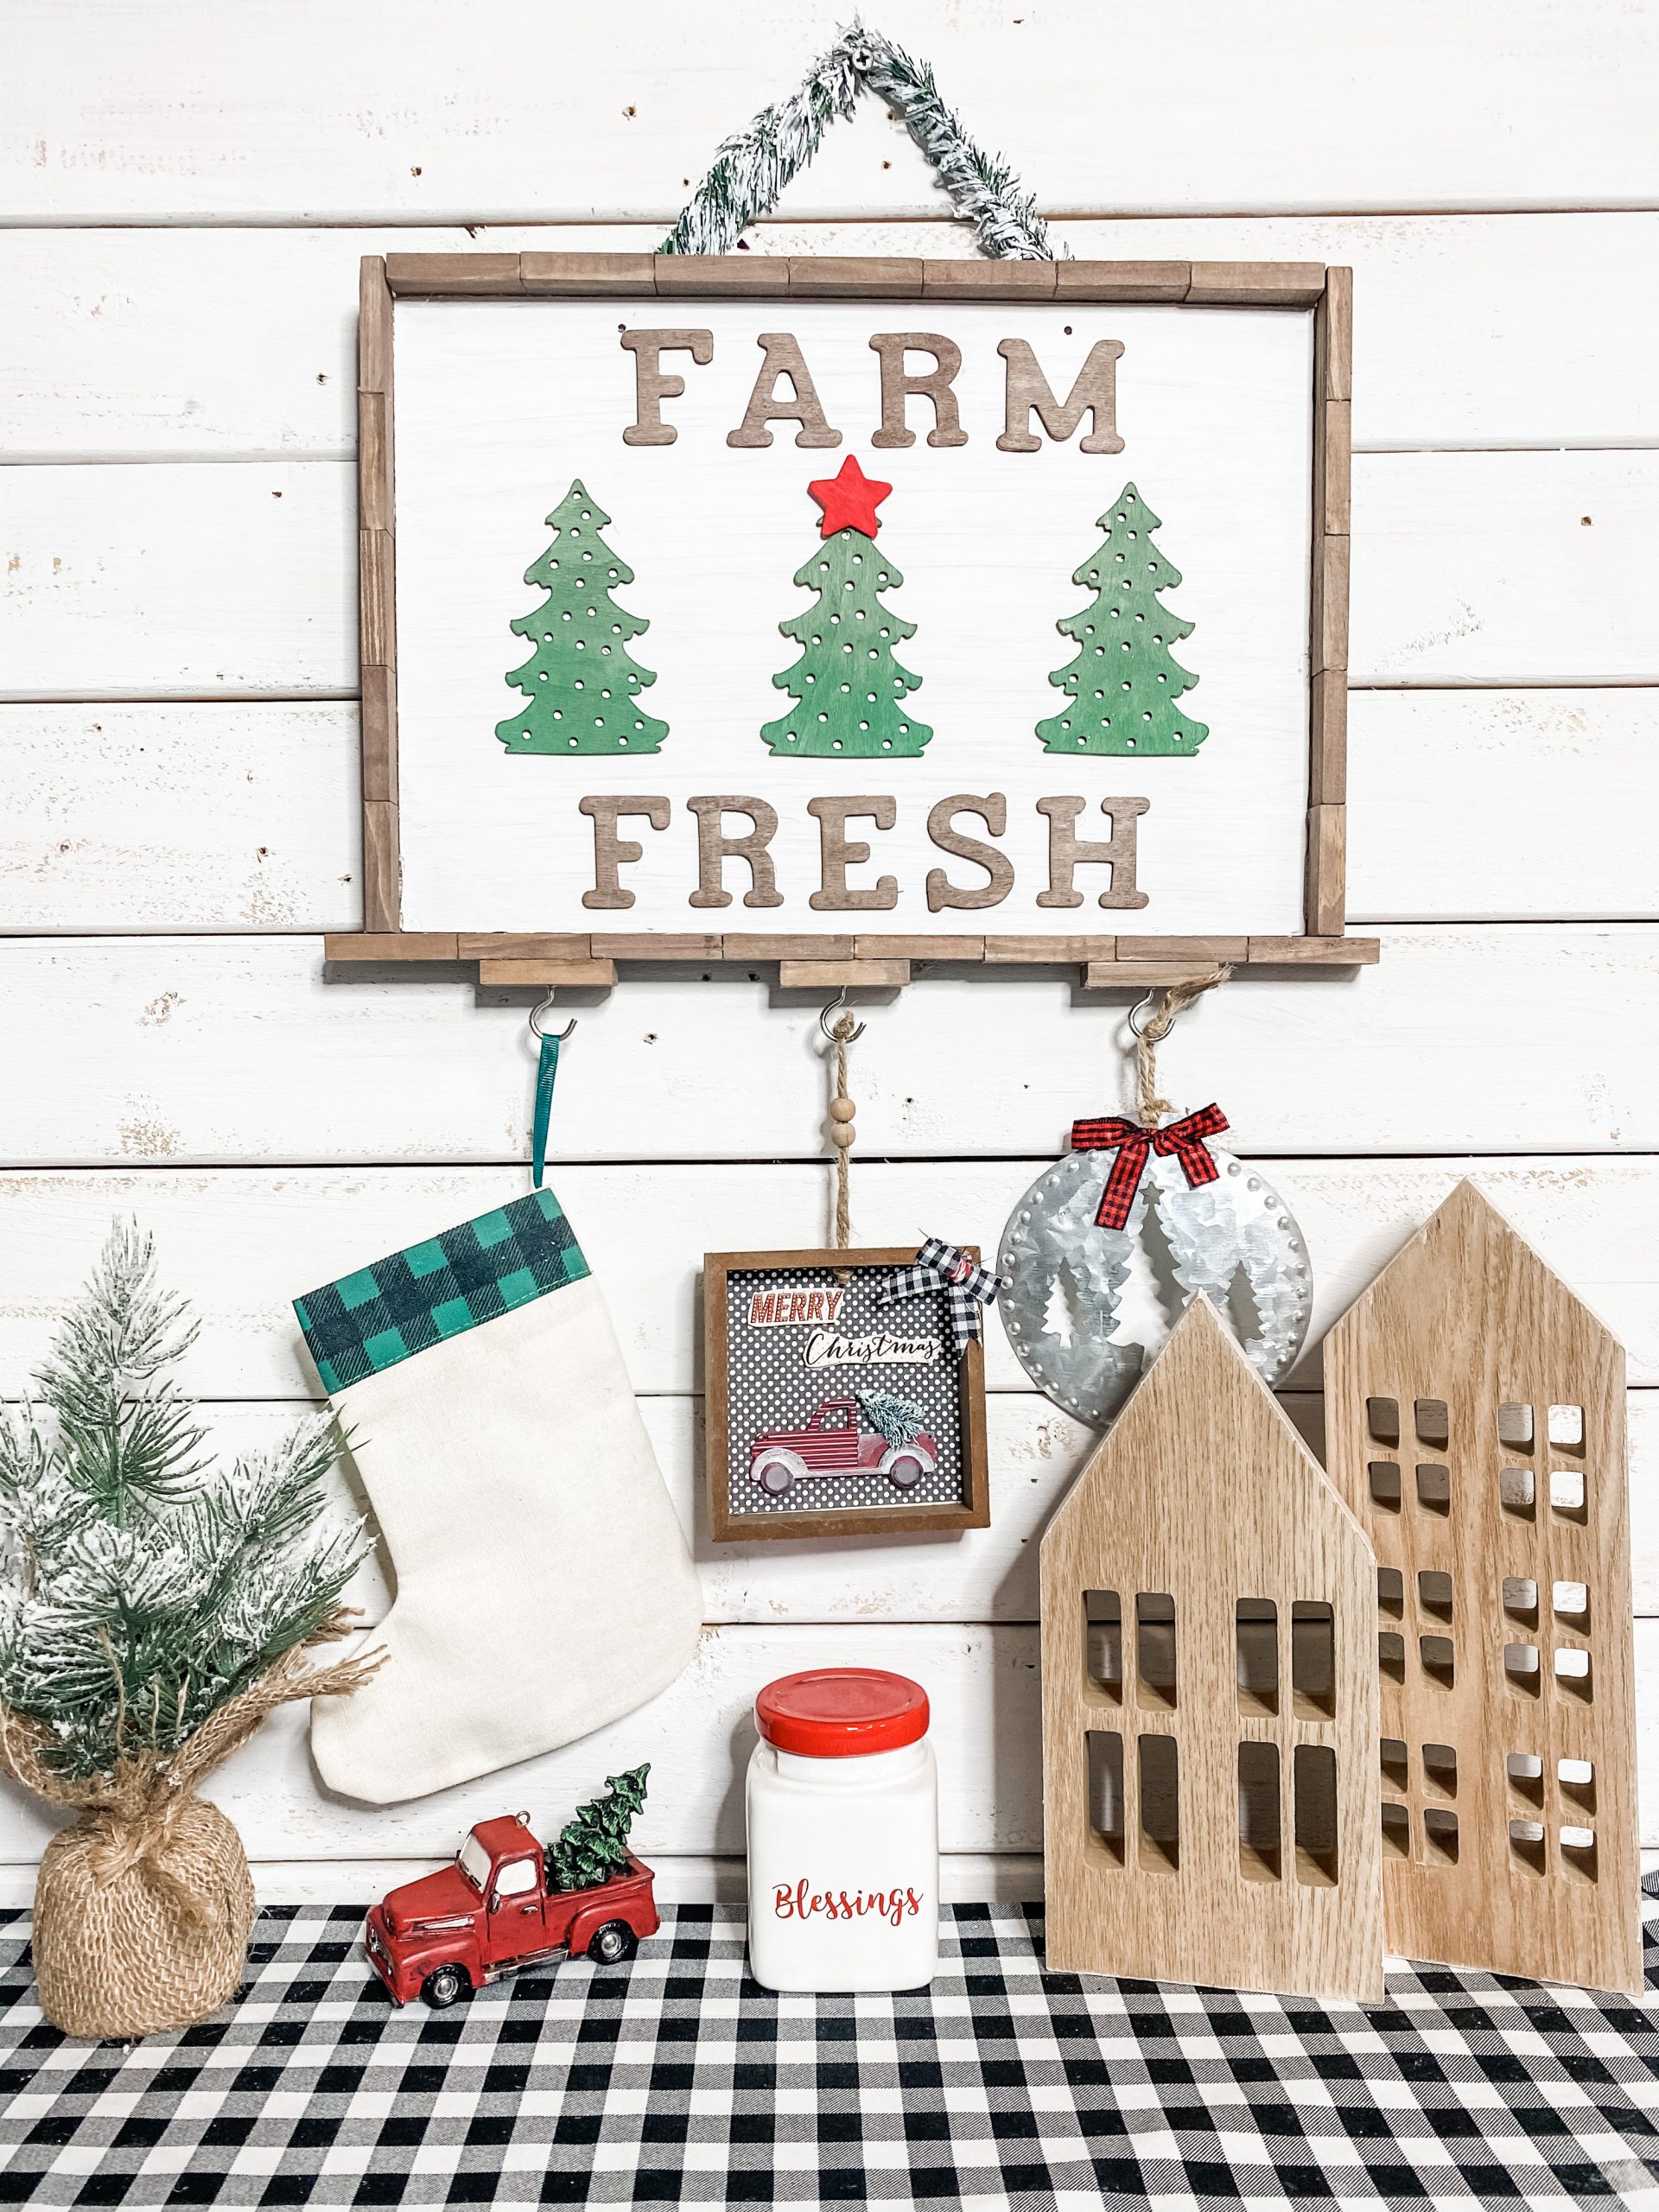 Adorable 5 Dollar Gifts for Christmas with Dollar Tree Items